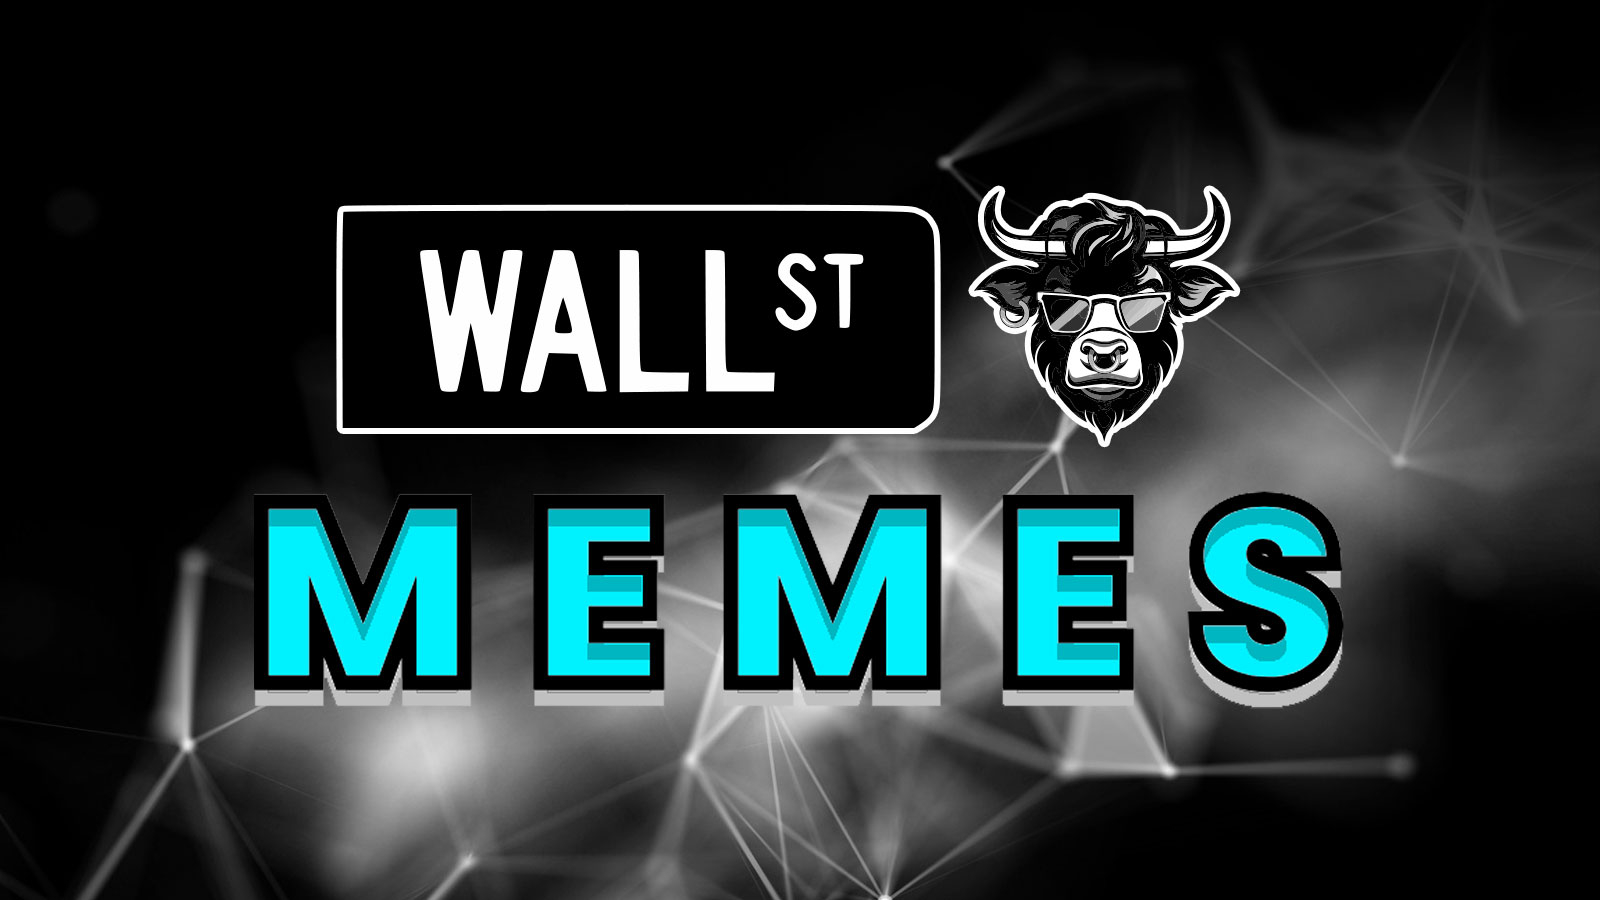 Wall Street Memes to Trade on OKX From Tuesday – The $30M Presale Hints at  a Strong Meme Coin Pump | U.Today